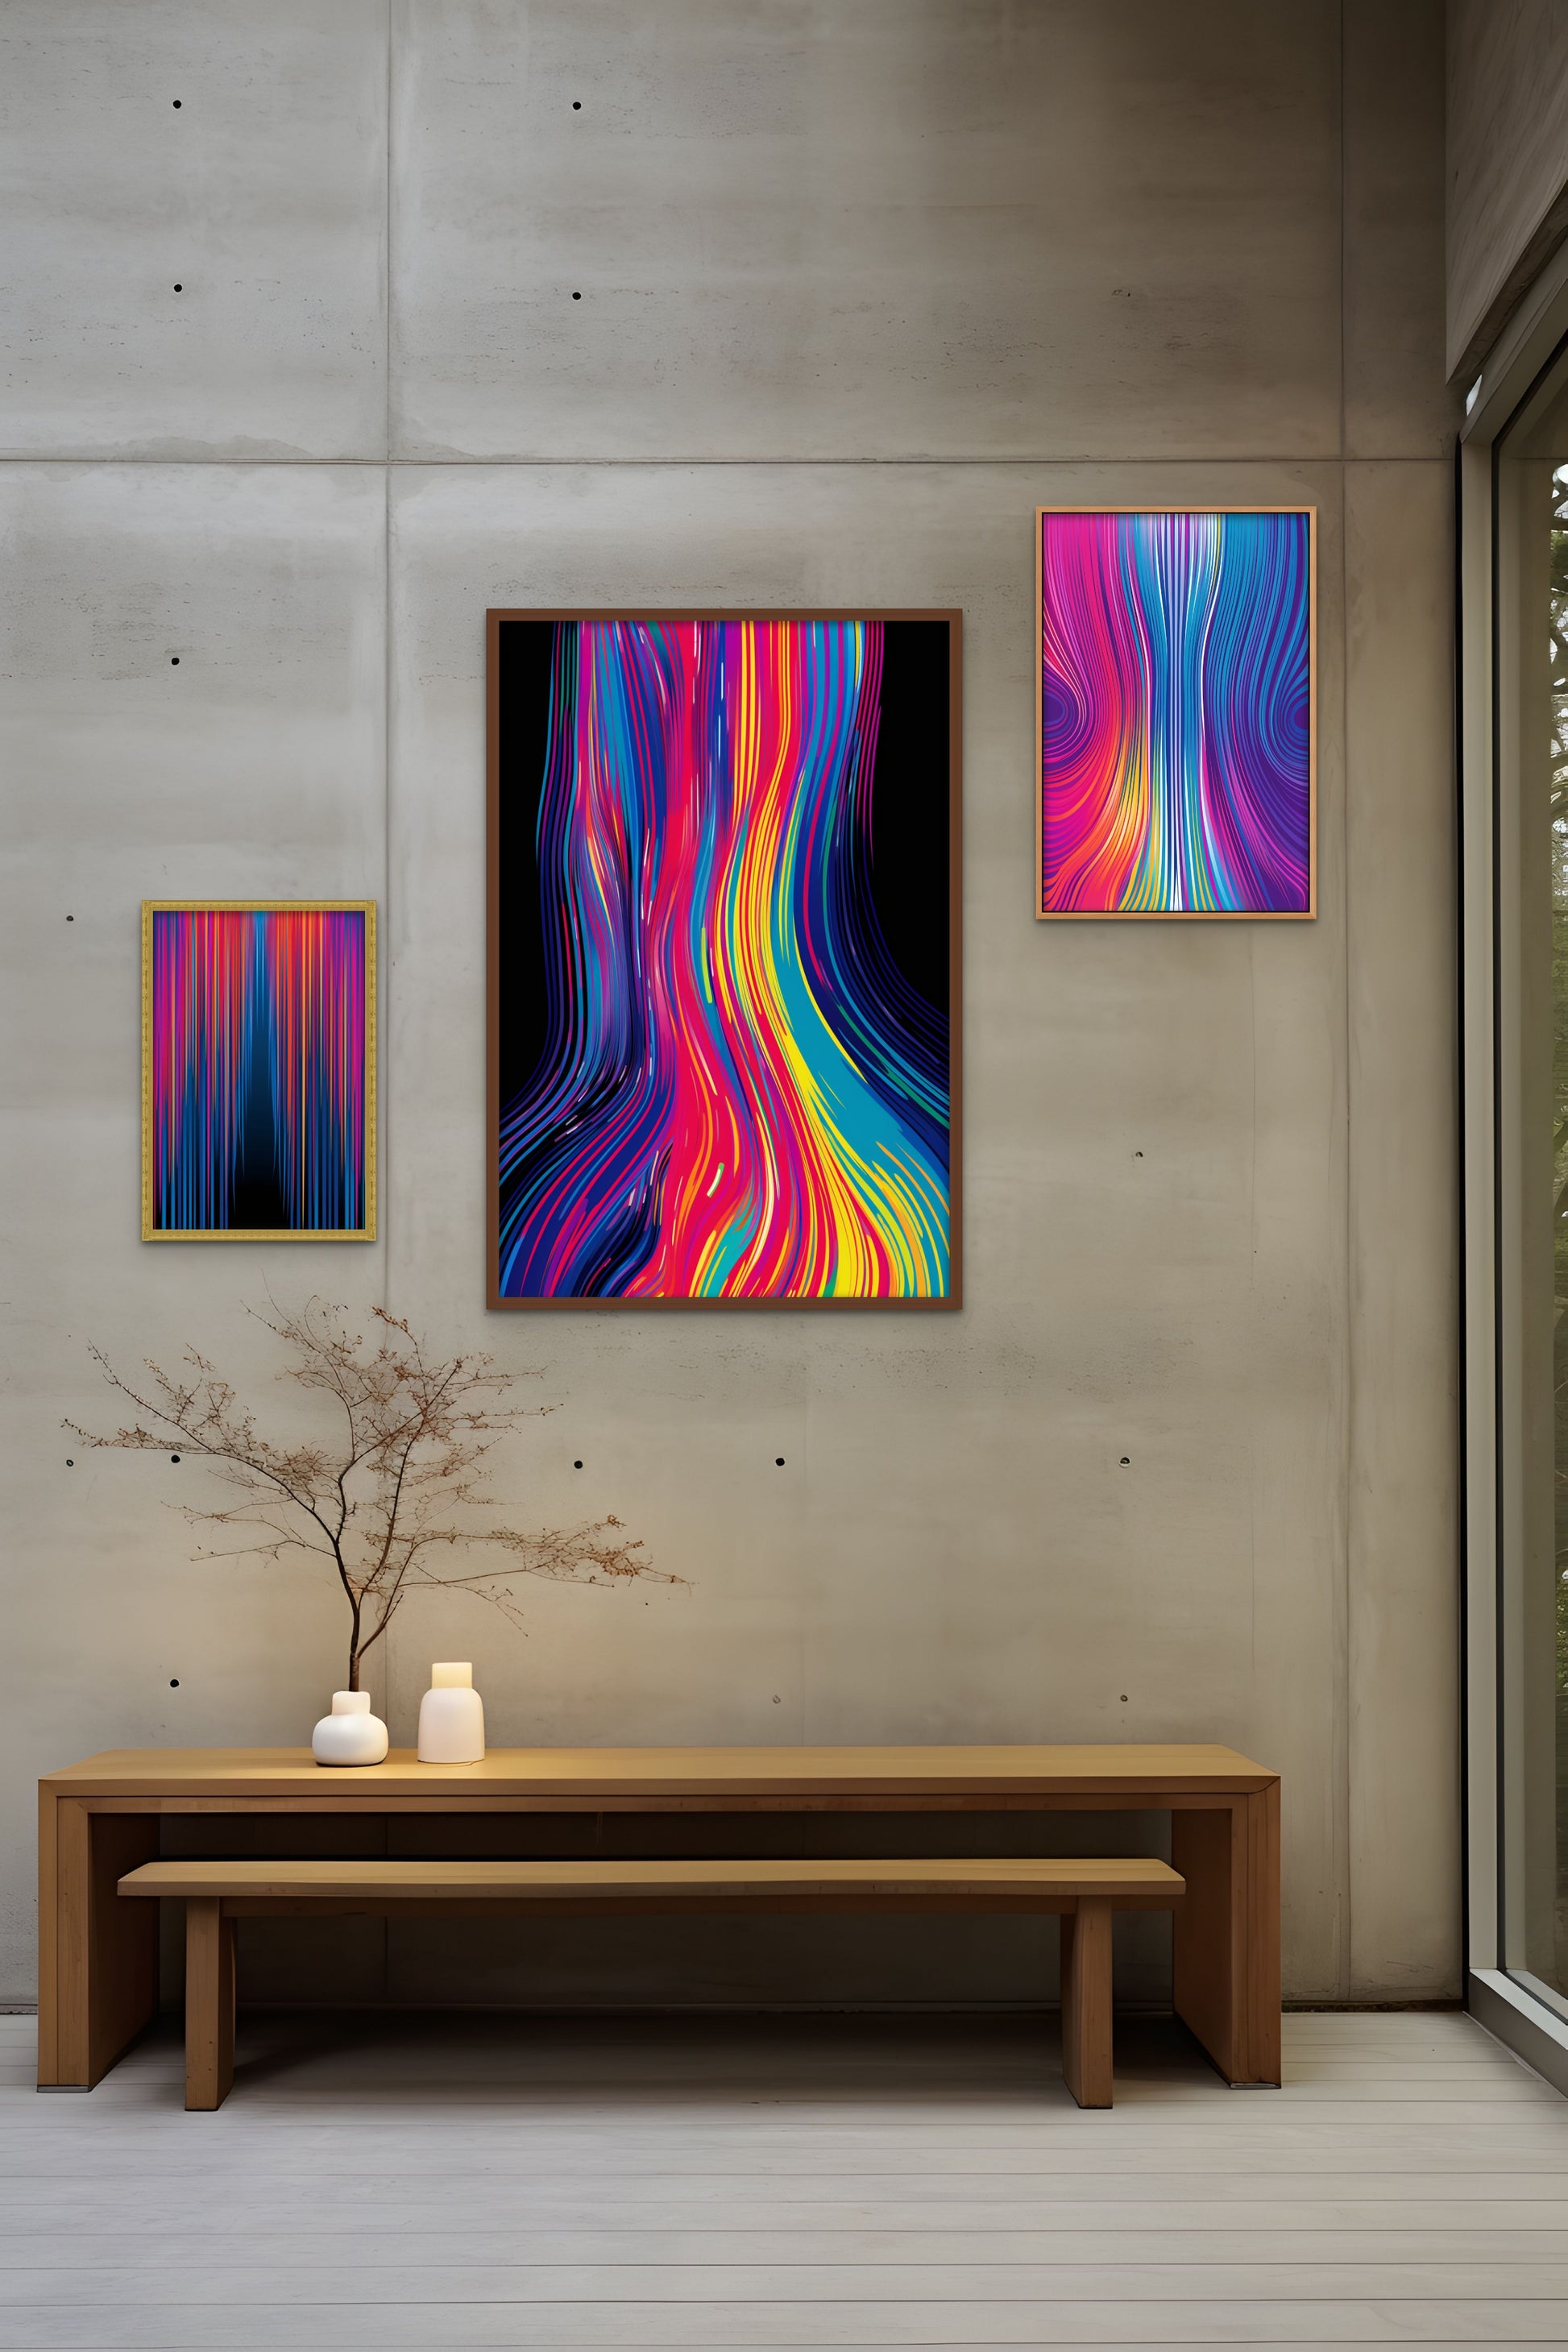 Modern abstract art on a wall above a wooden bench with a plant and vases.